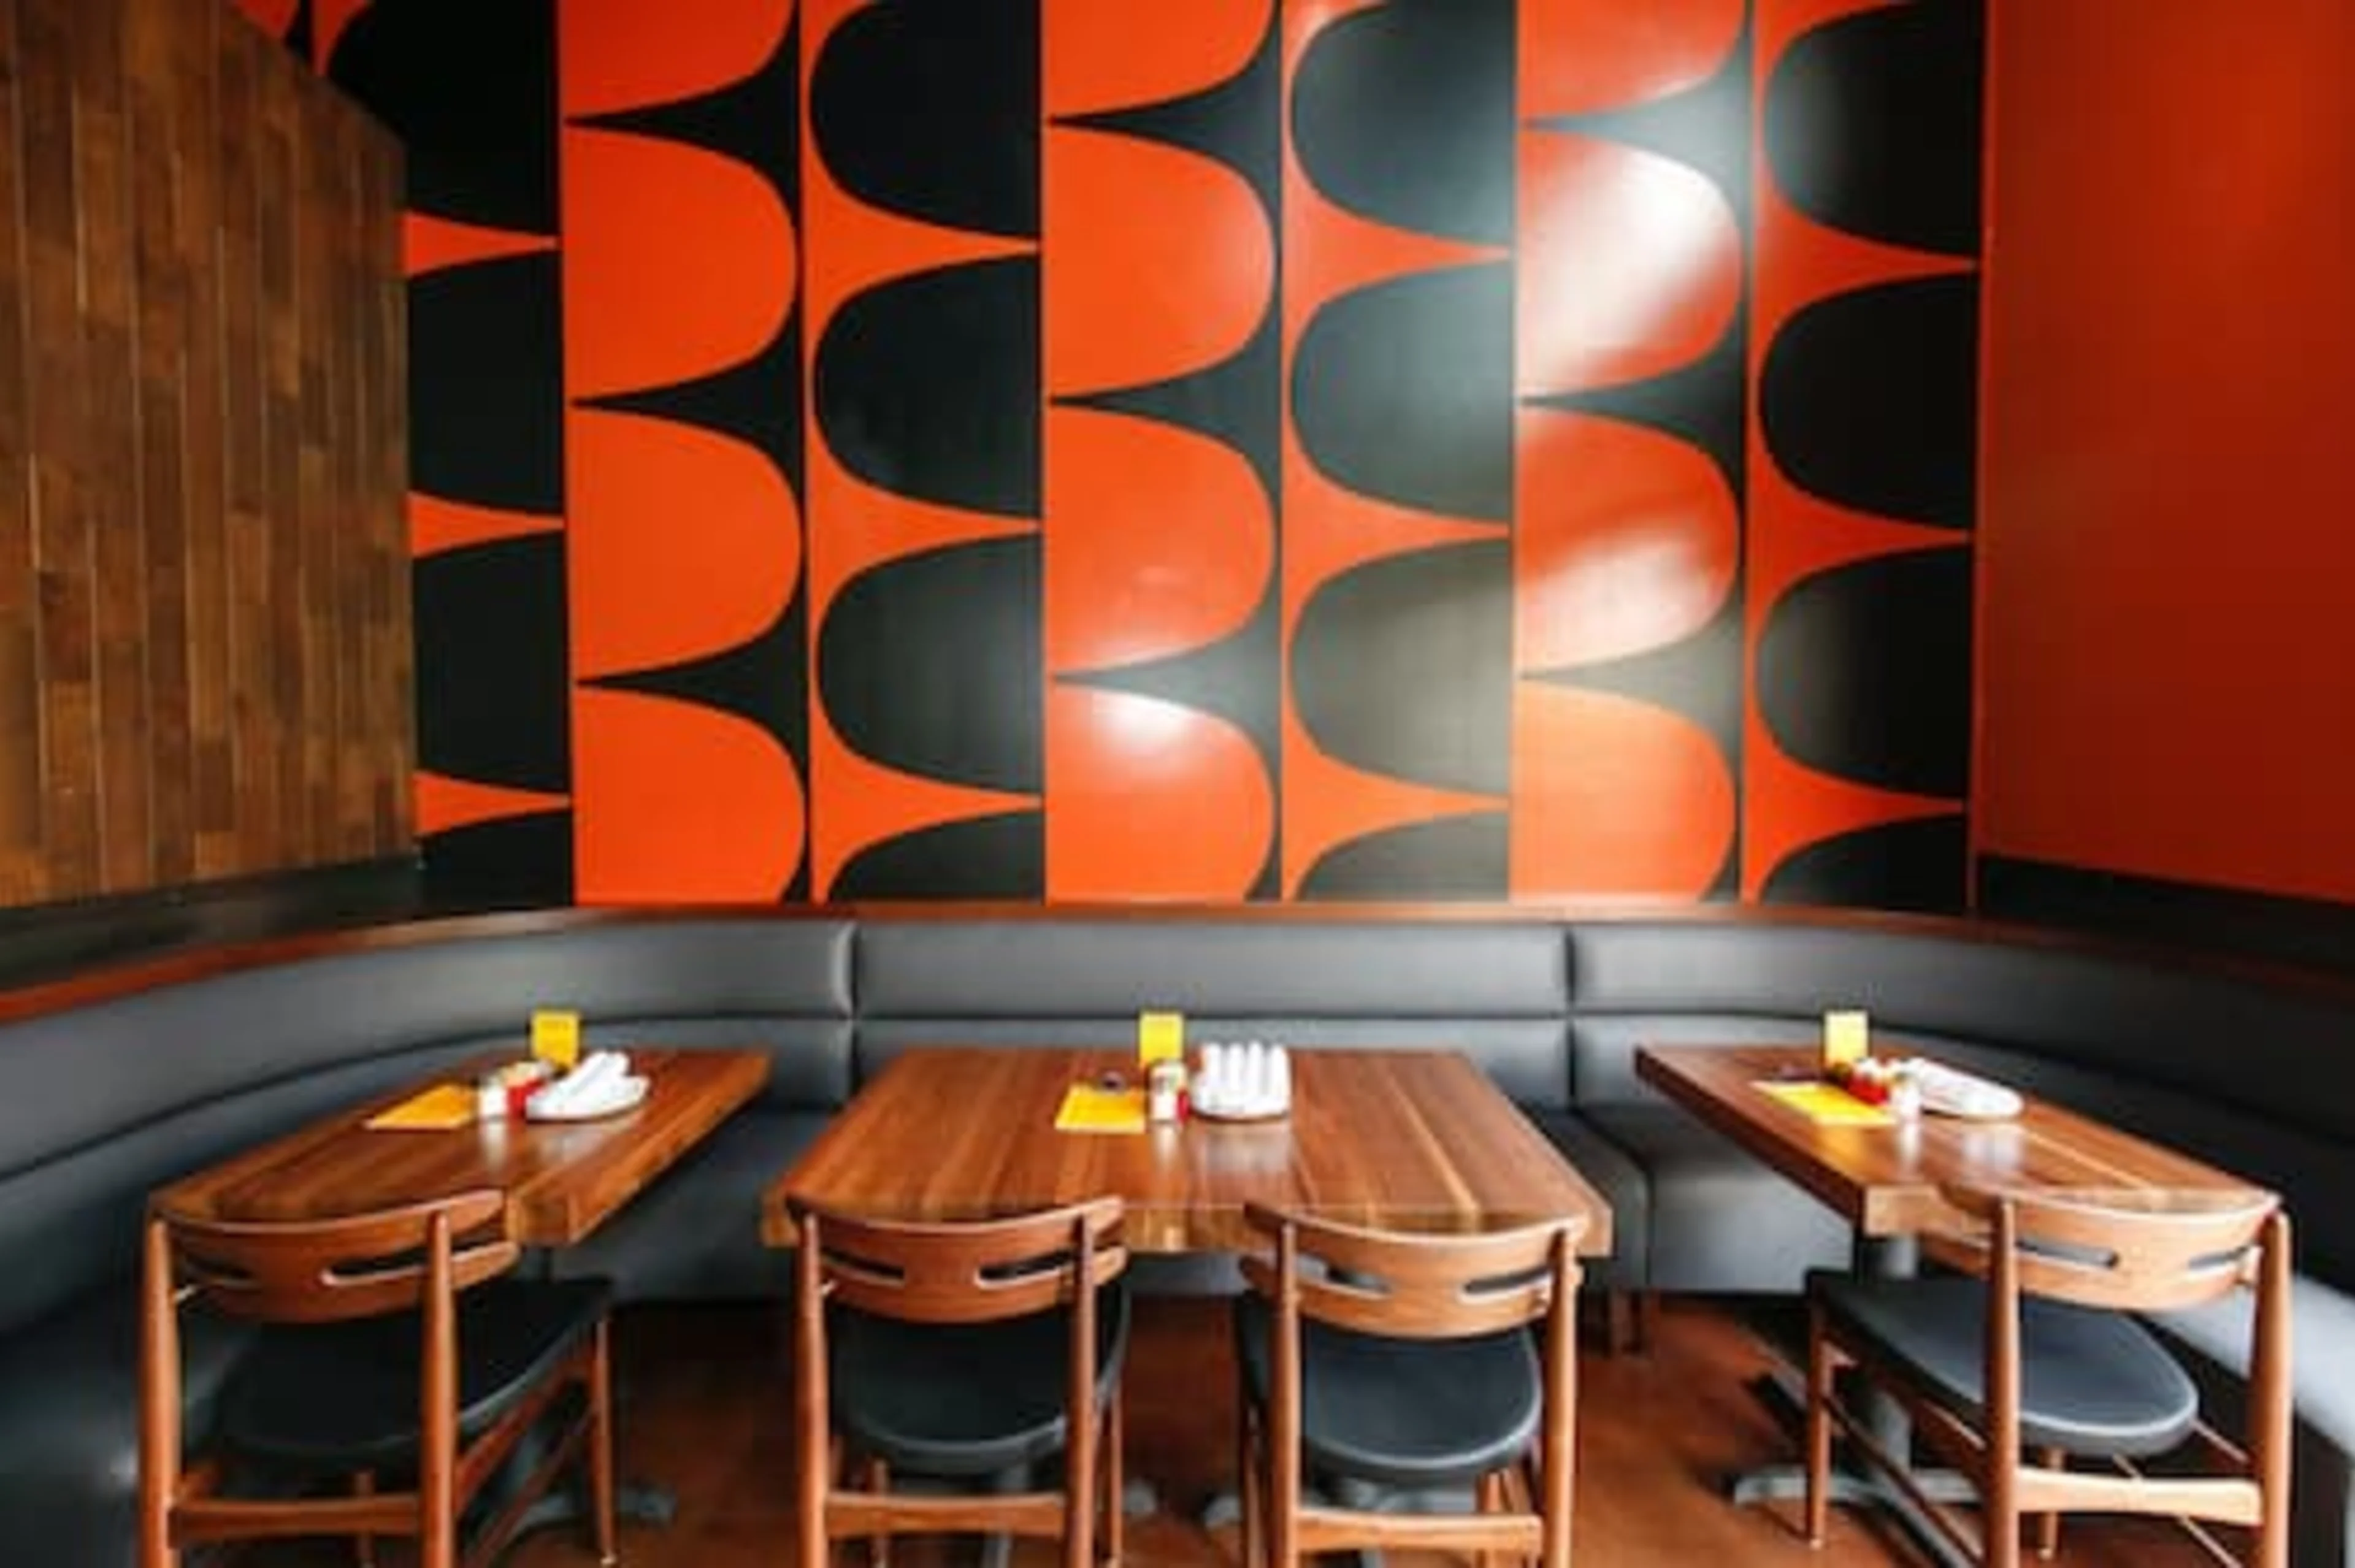 A grey booth with black and white wall art behind it.